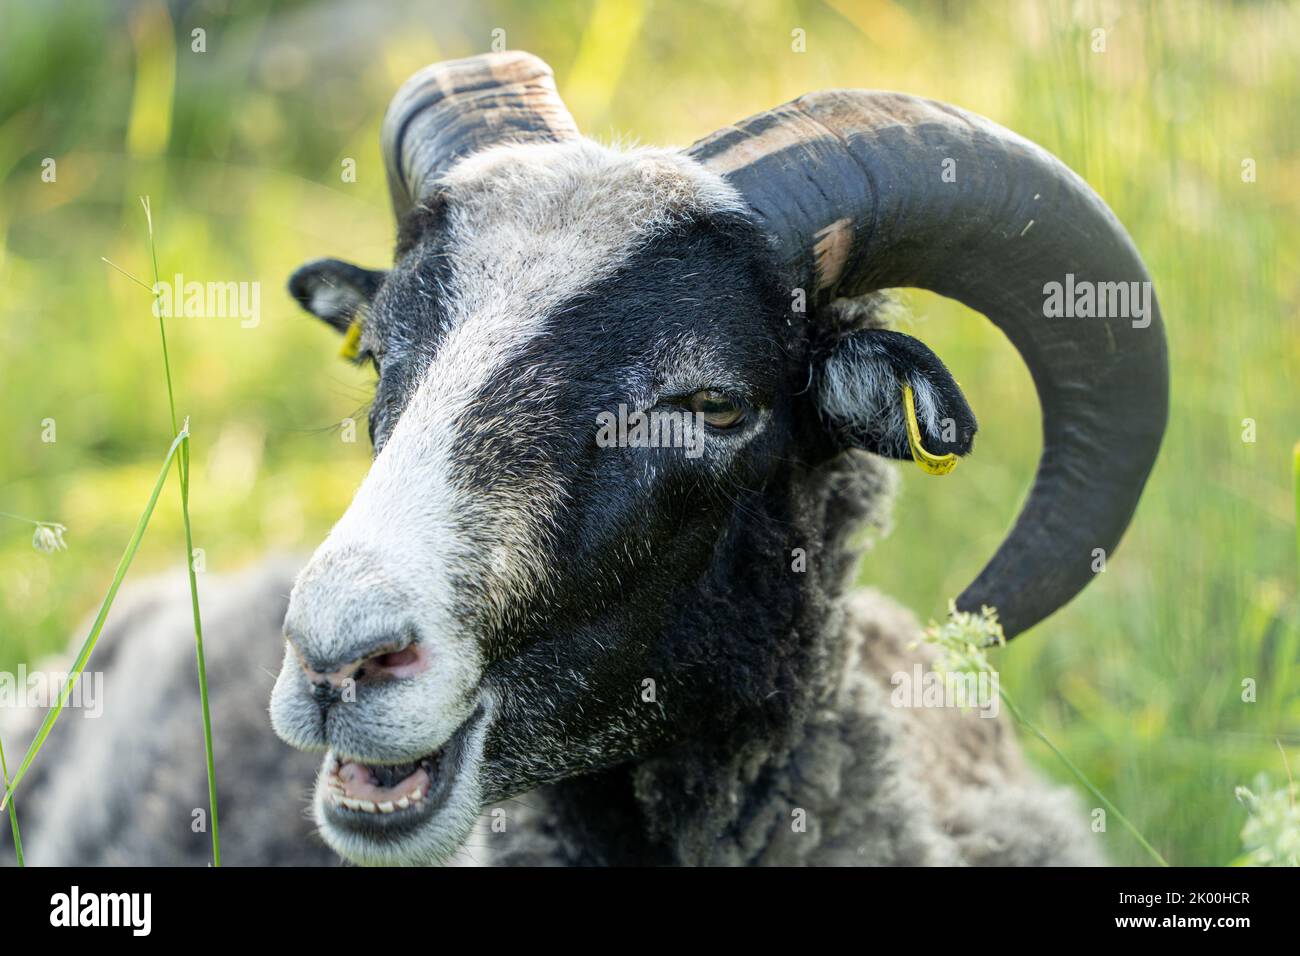 Image of Funny goat. Head of silly looking black goat, closeup portrait with shallow depth of field Stock Photo